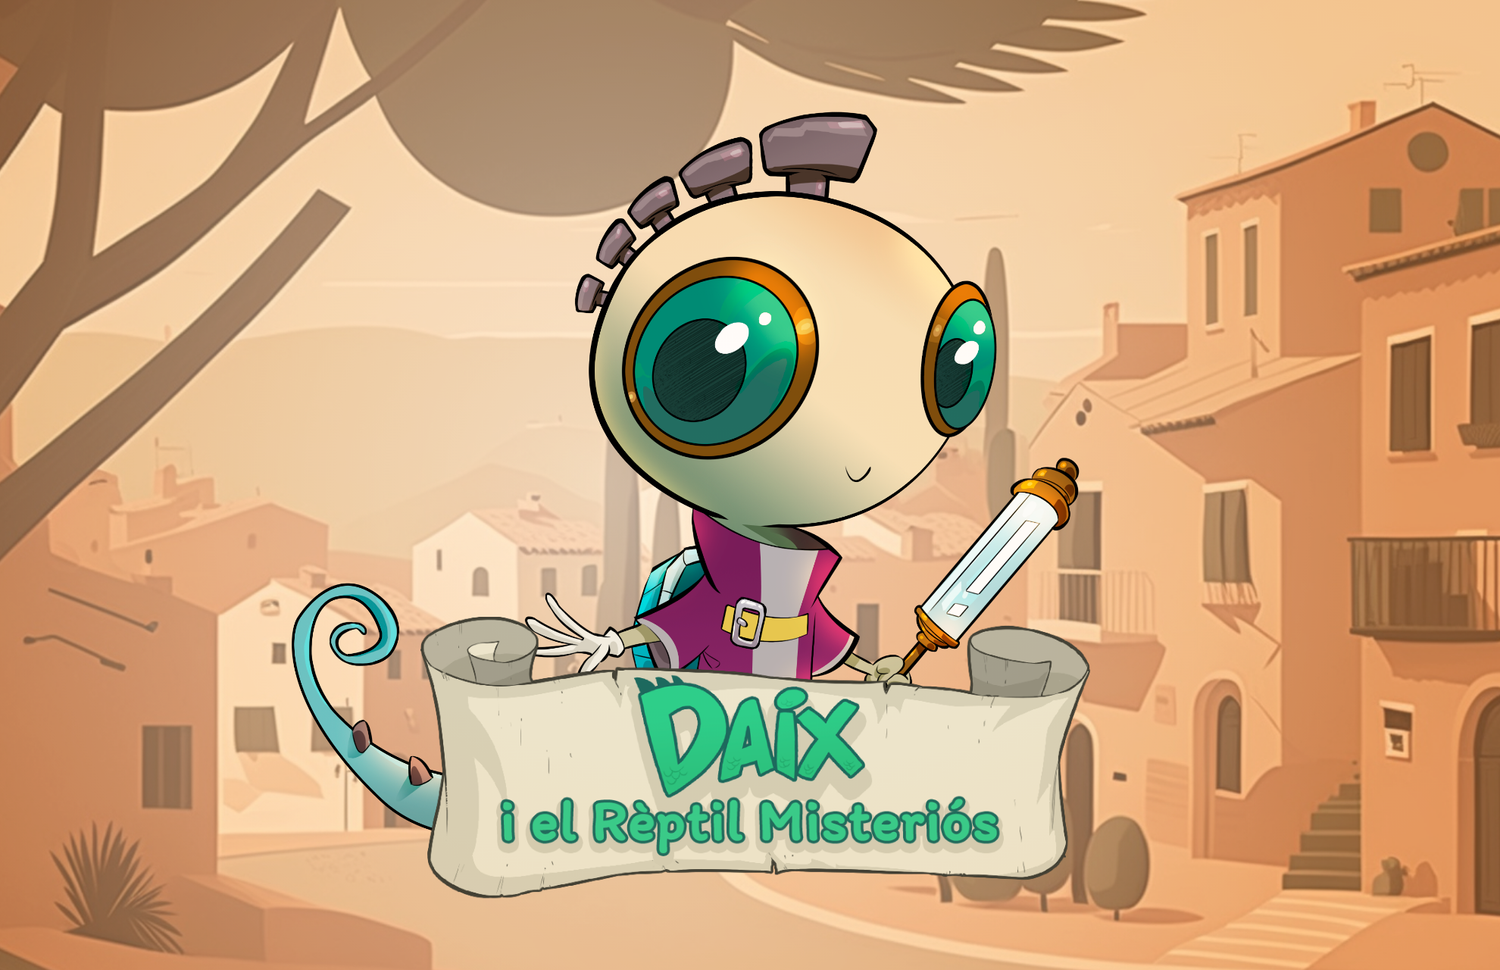 Daix & The mysterious reptile